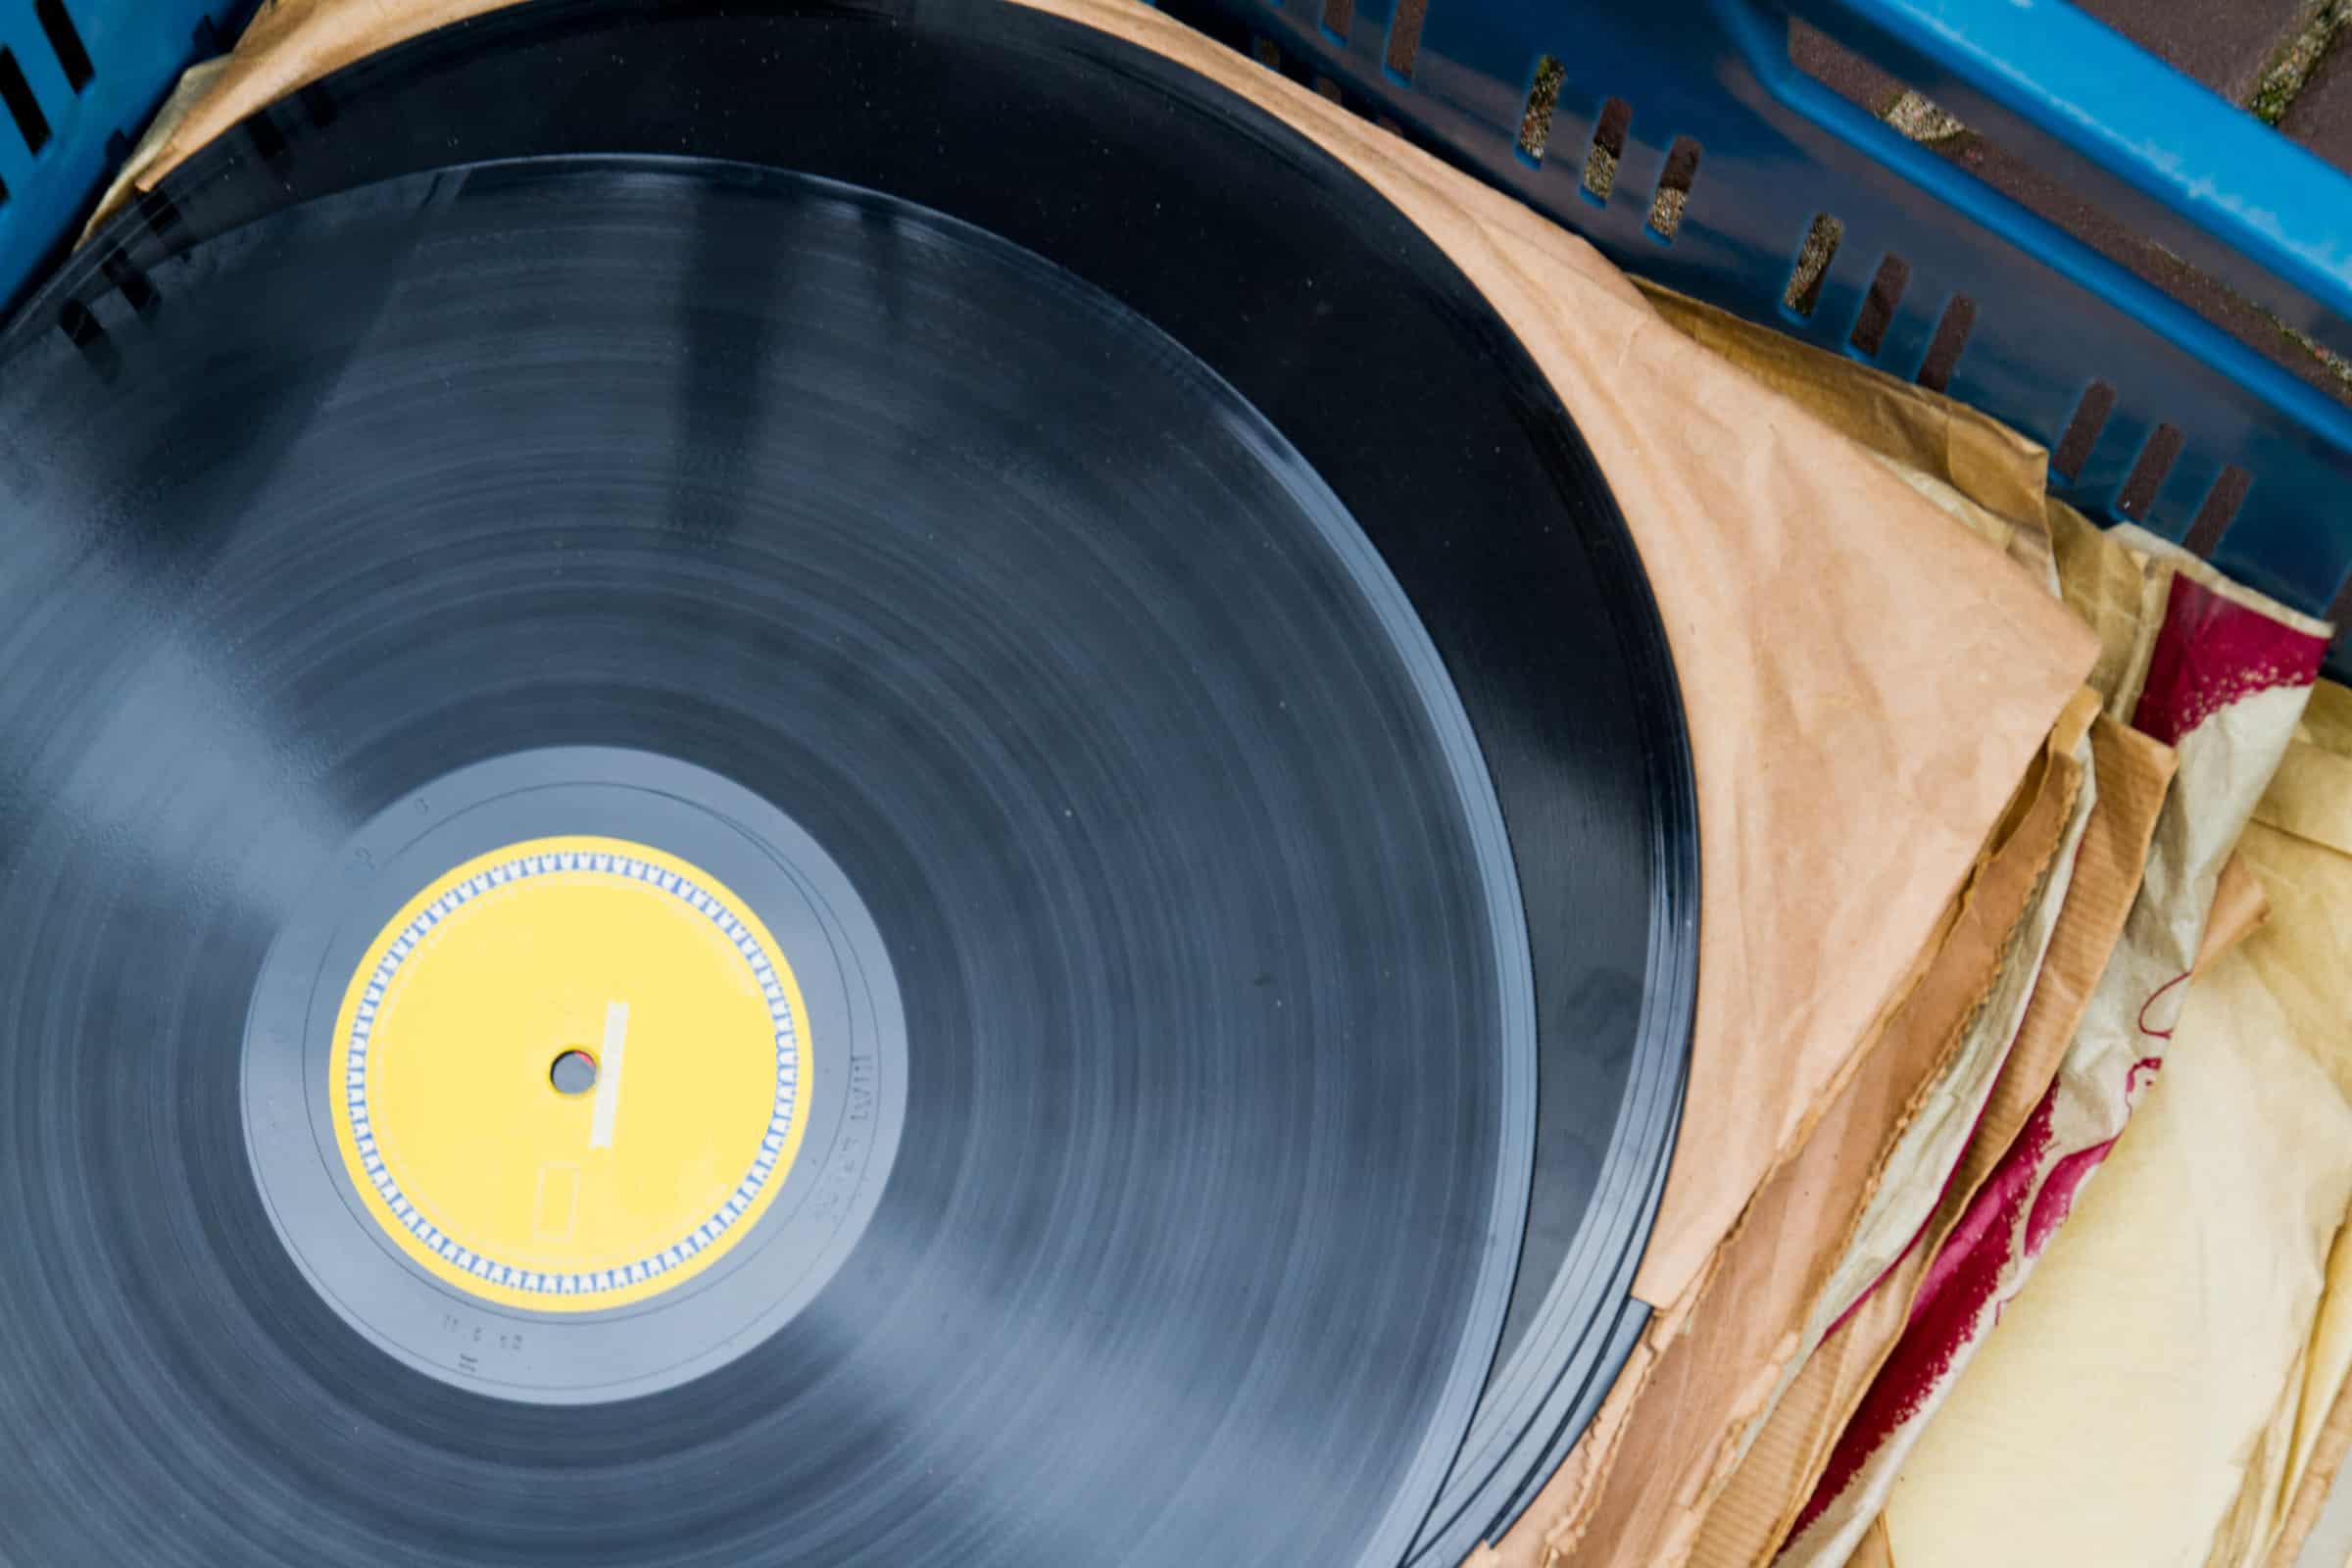 Top 5 Tips For Storing Vinyl Records – ComparingStorage